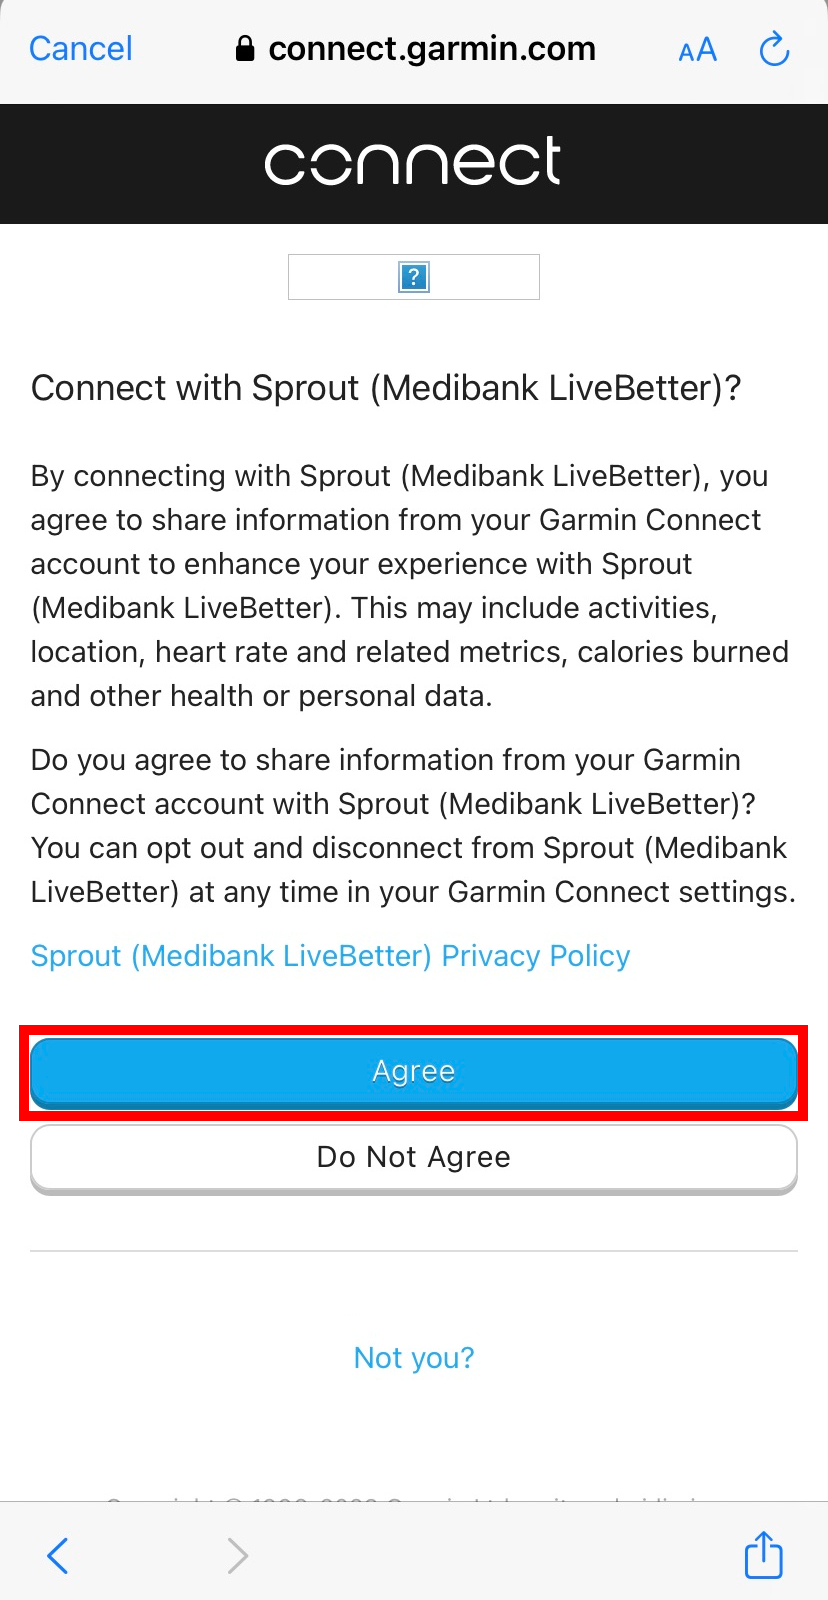 Confirmation message about connecting Sprout (Medibank LiveBetter) to your Garmin app to track your progress. Agree button has been selected. 